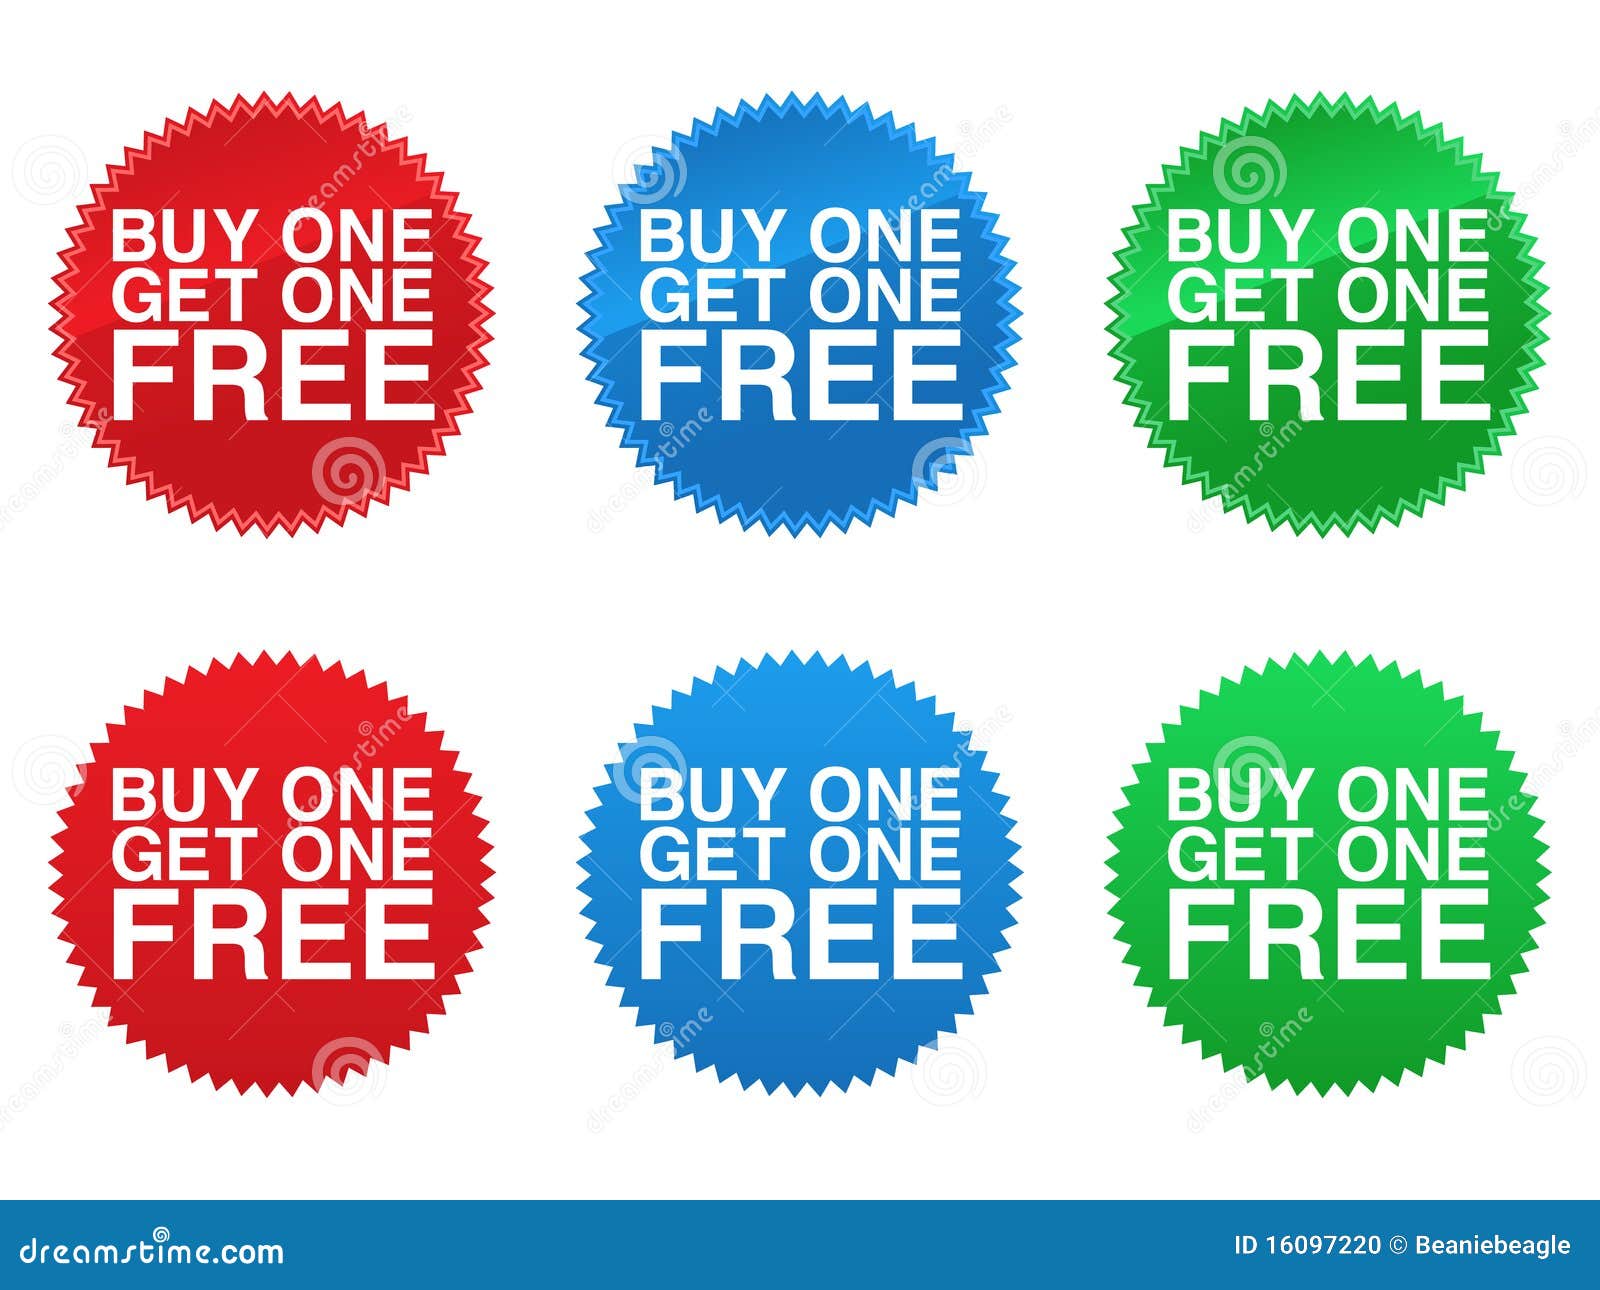 buy one get one free seals eps